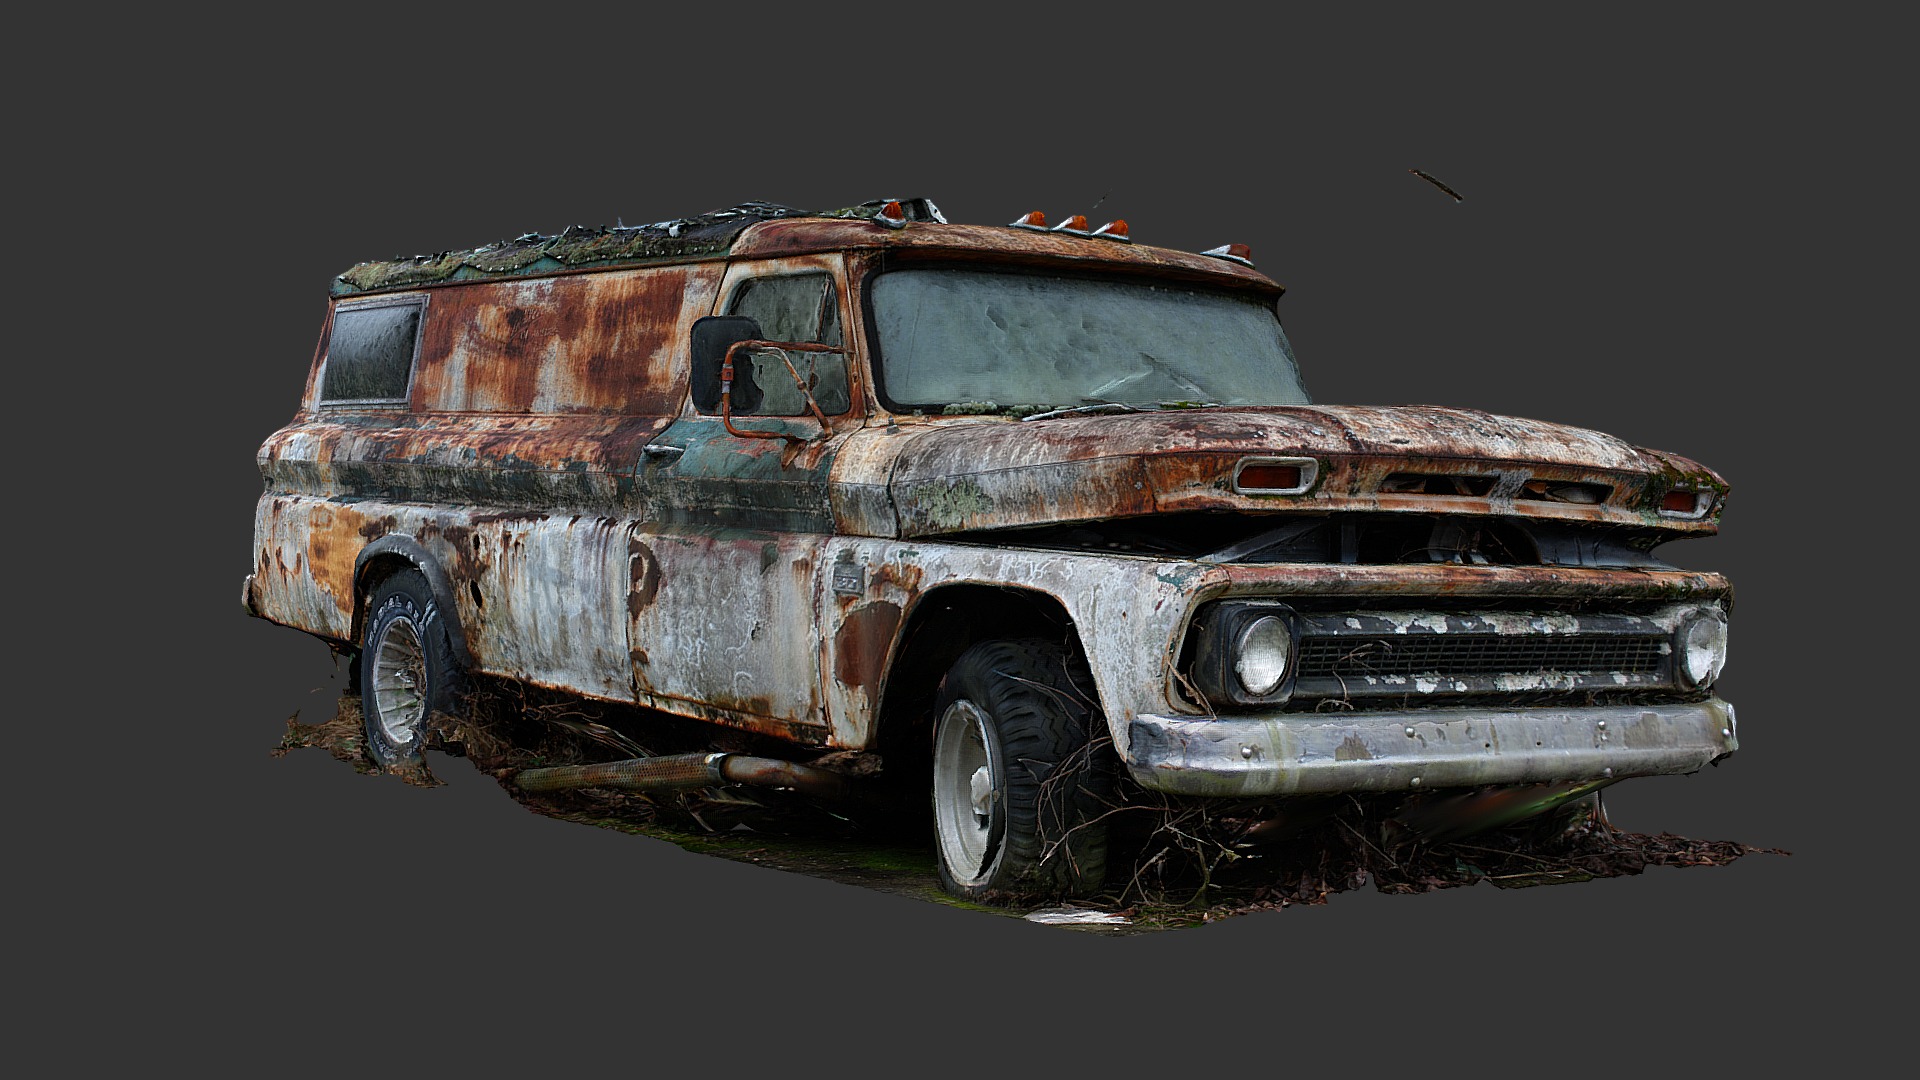 Seems like at some point, this truck's previous owner turned it into some kind of party van with a canvas roof and a paintjob with graphics on it.

Processed in RealityCapture from 159 photos 3d model